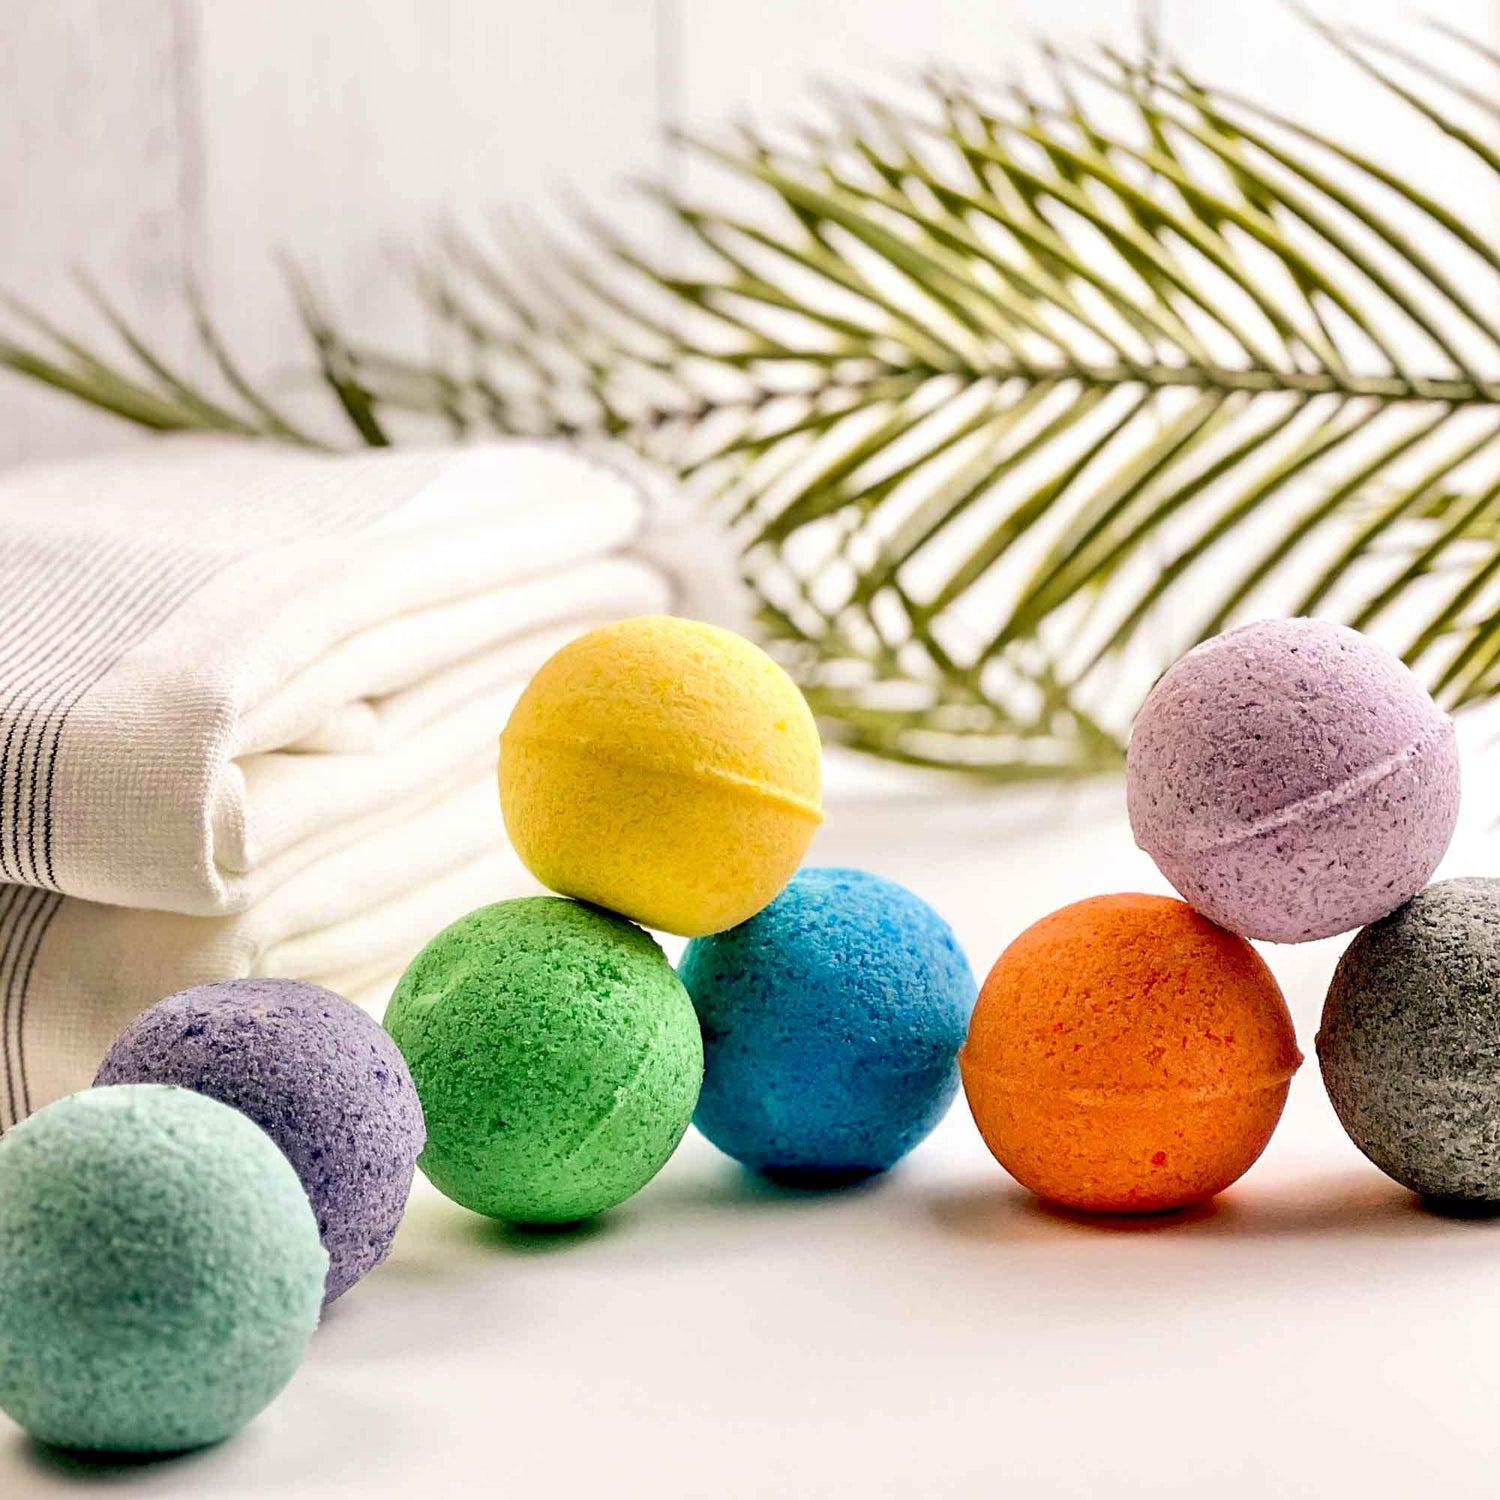 Indulge in Luxury with our Handcrafted Sea Salt Orchid Bath Bombs - Soothe Your Body and Mind with the Perfect Spa Experience!